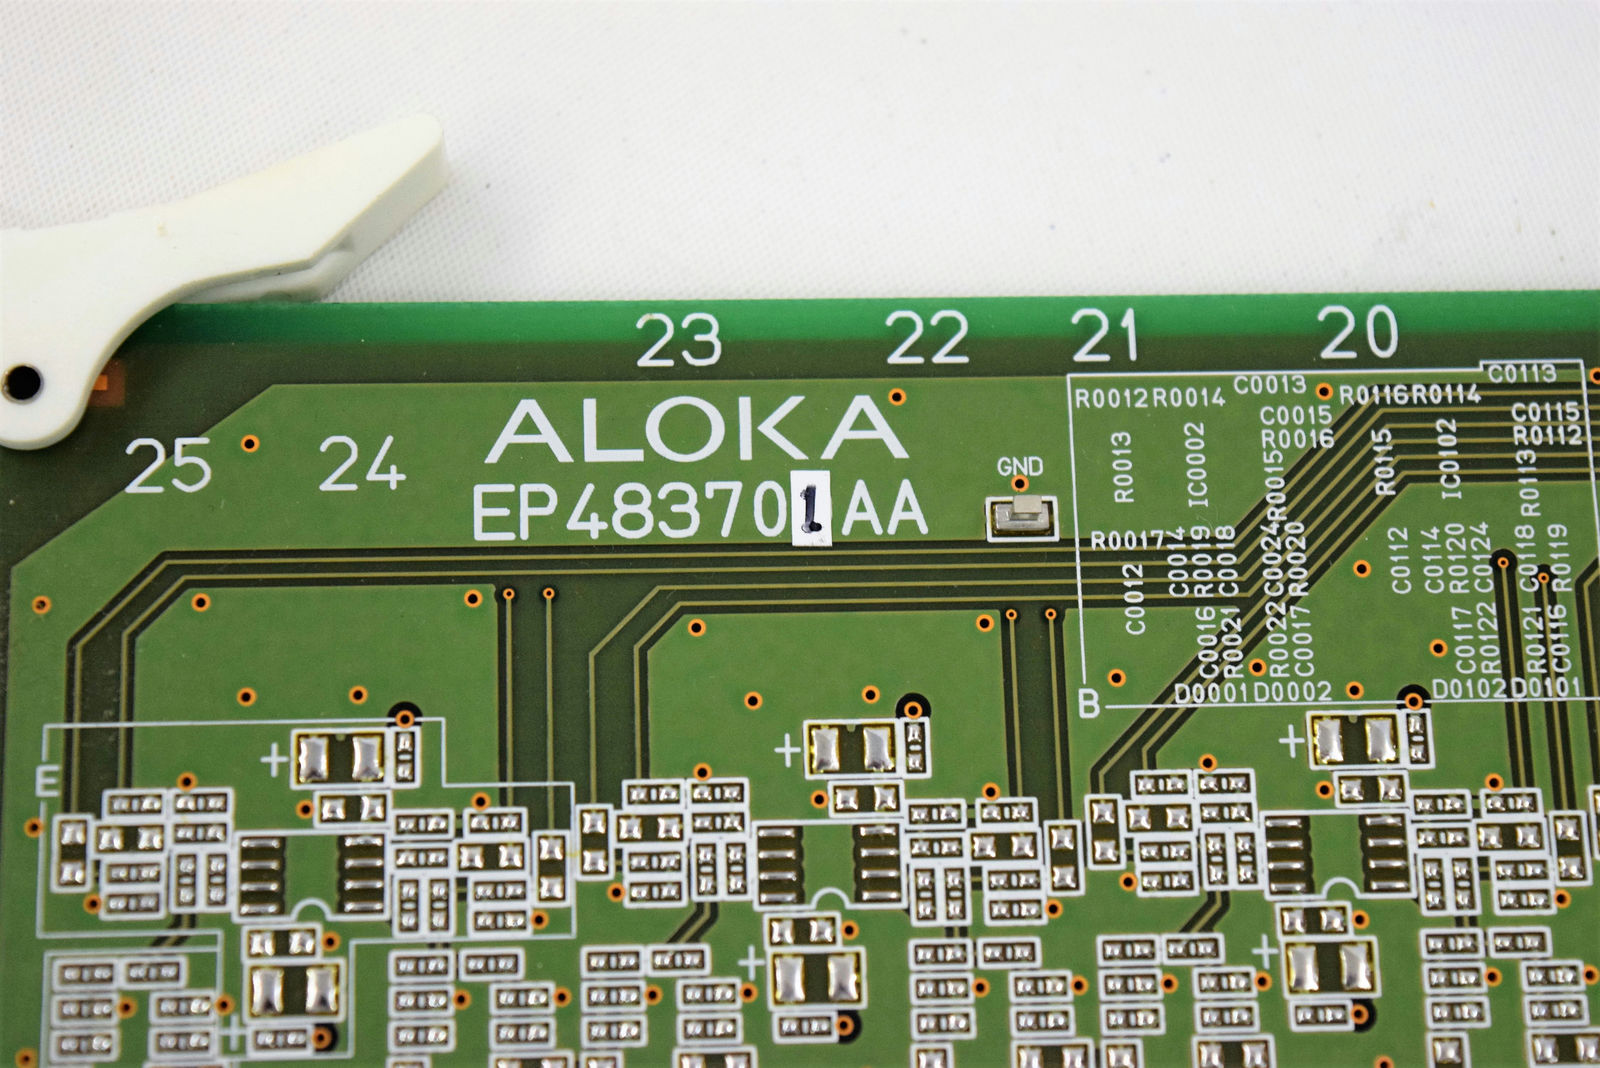 Aloka Prosound SSD-3500 Plus Ultrasound System Control Board EP483701AA DIAGNOSTIC ULTRASOUND MACHINES FOR SALE